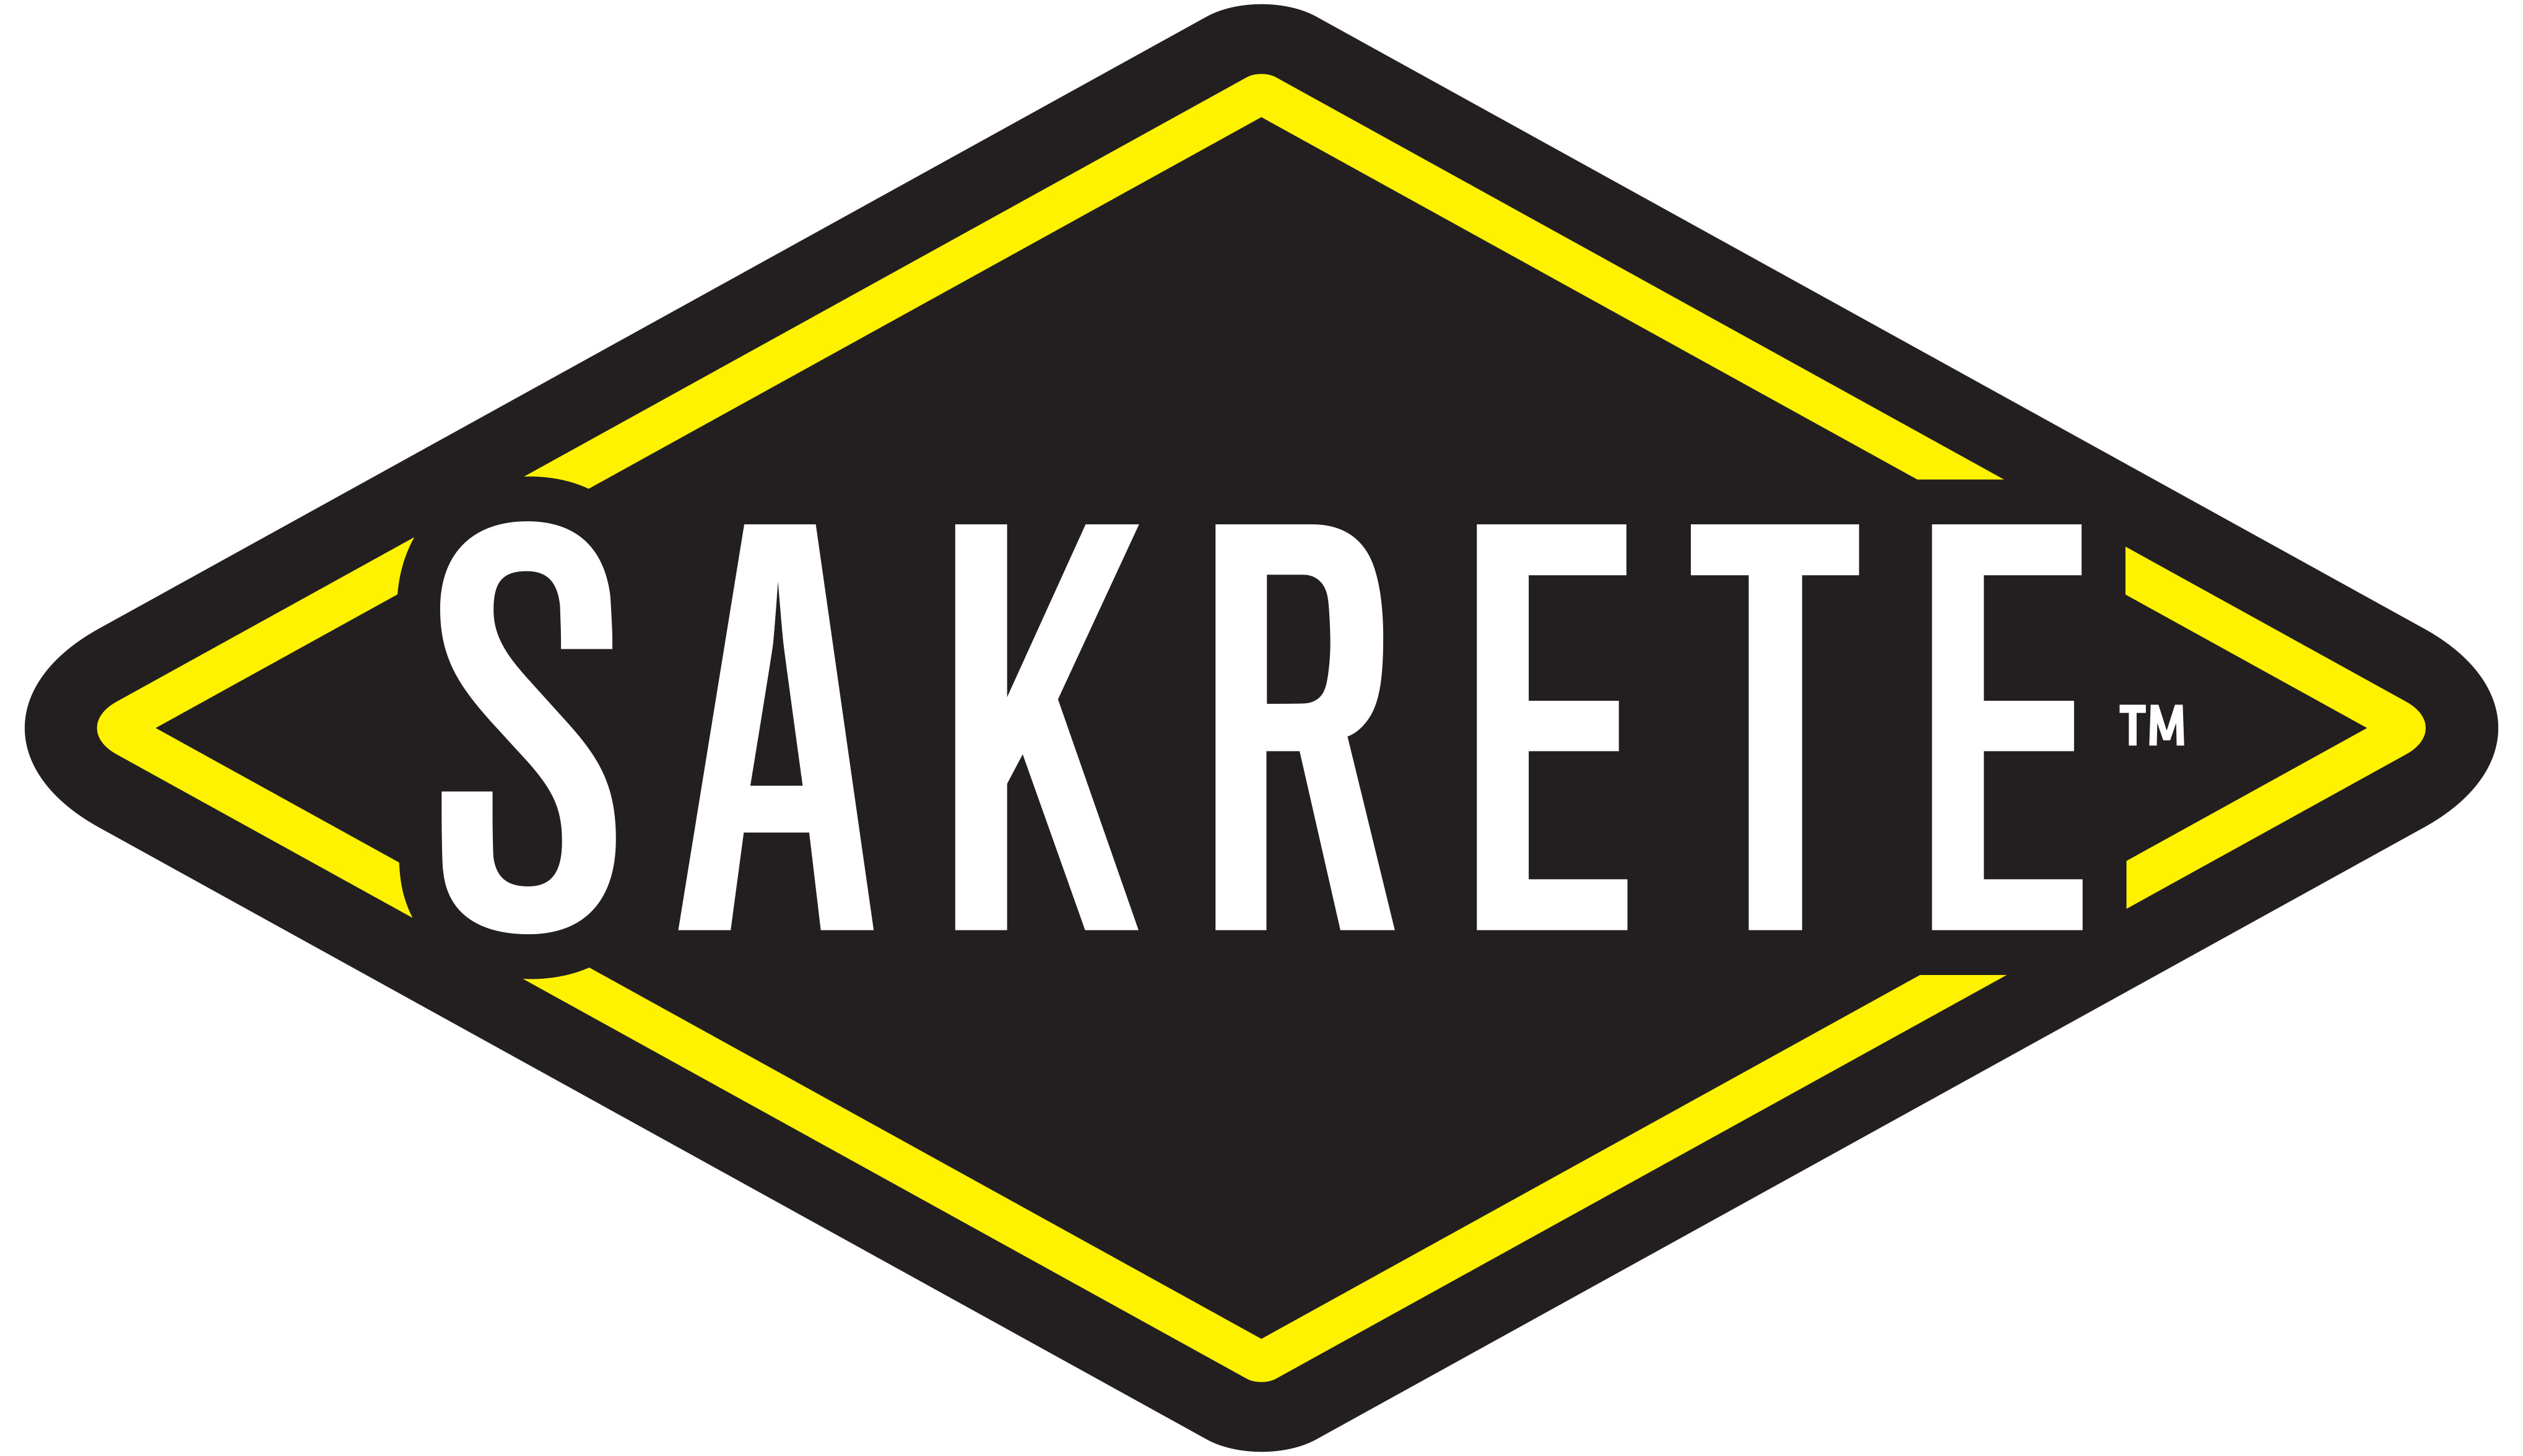 King Home Improvement Products Group Adopts New SAKRETE Branding